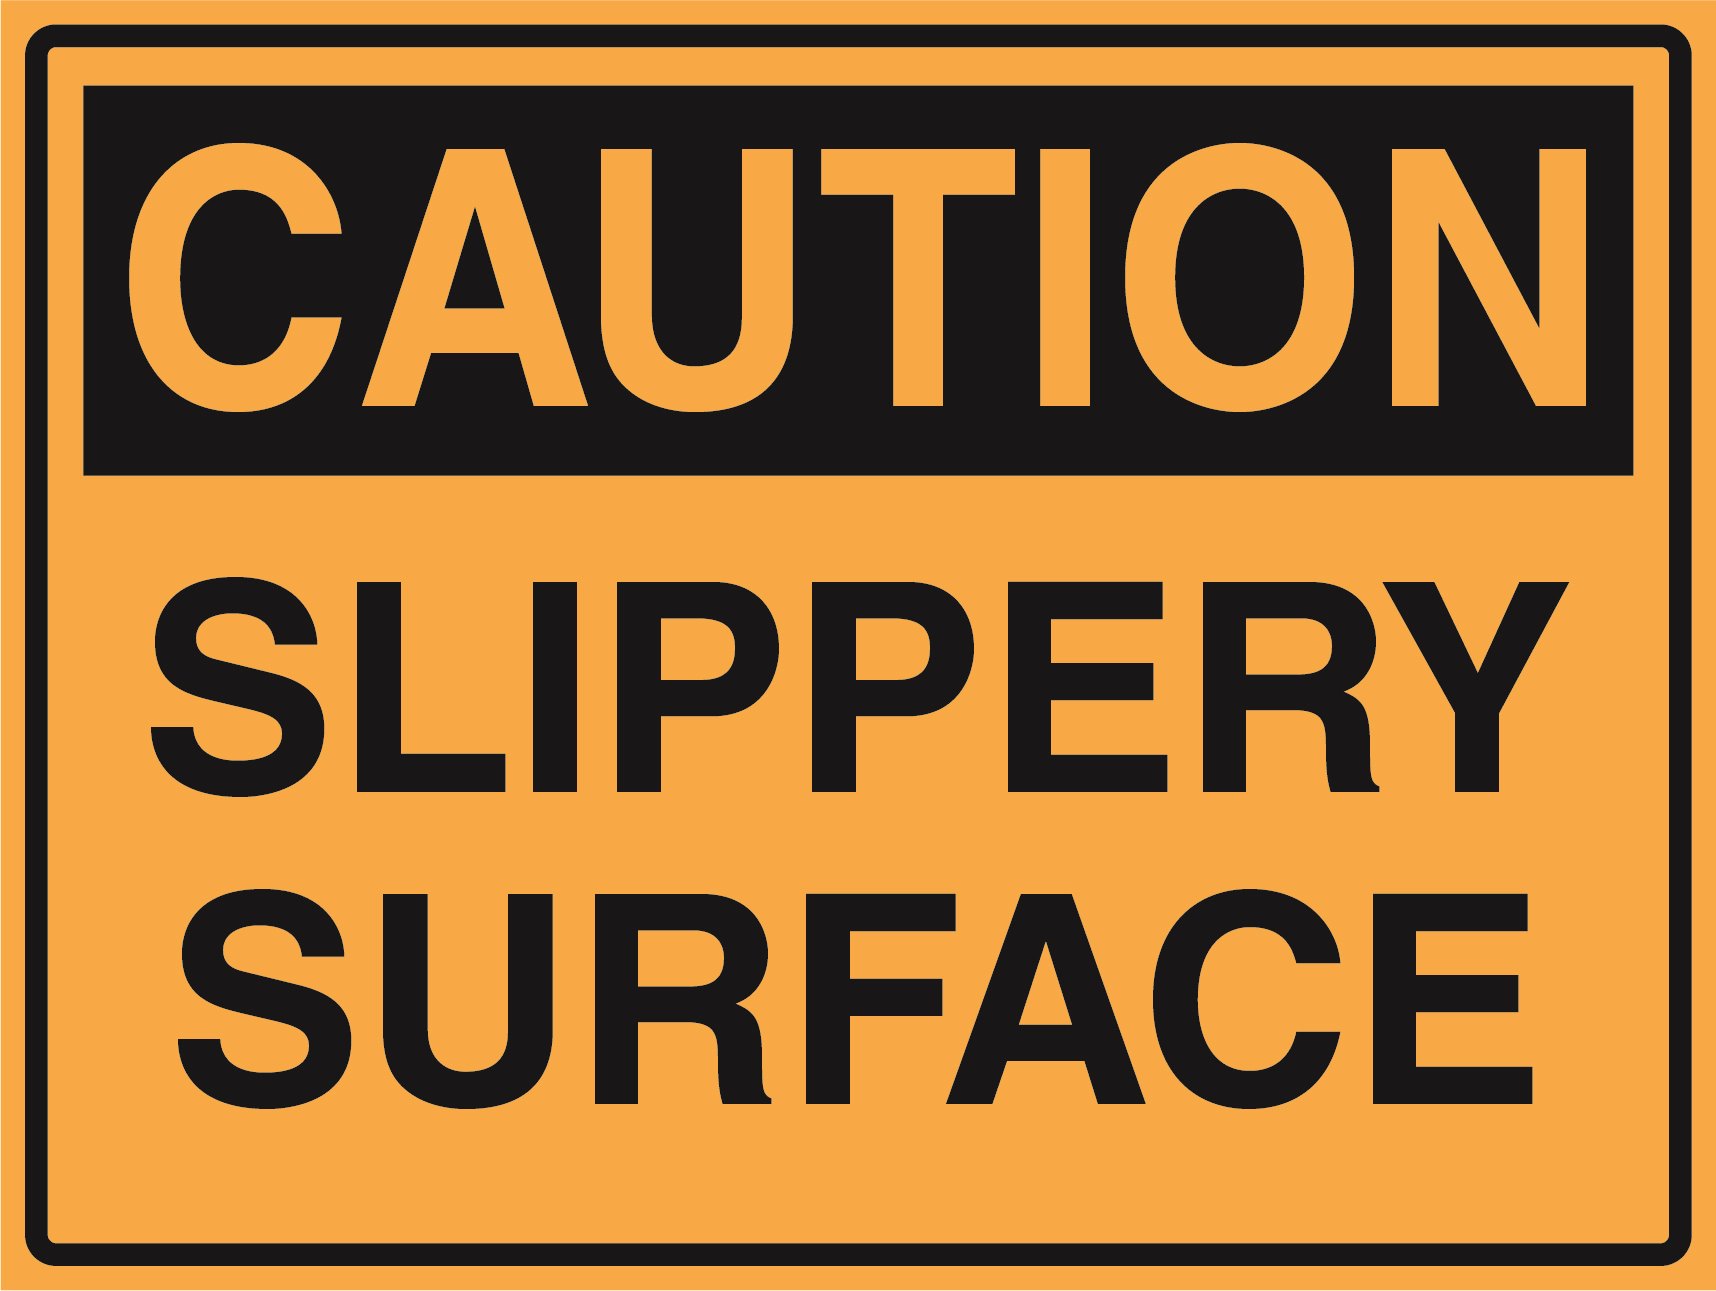 Caution - Slippery Surface